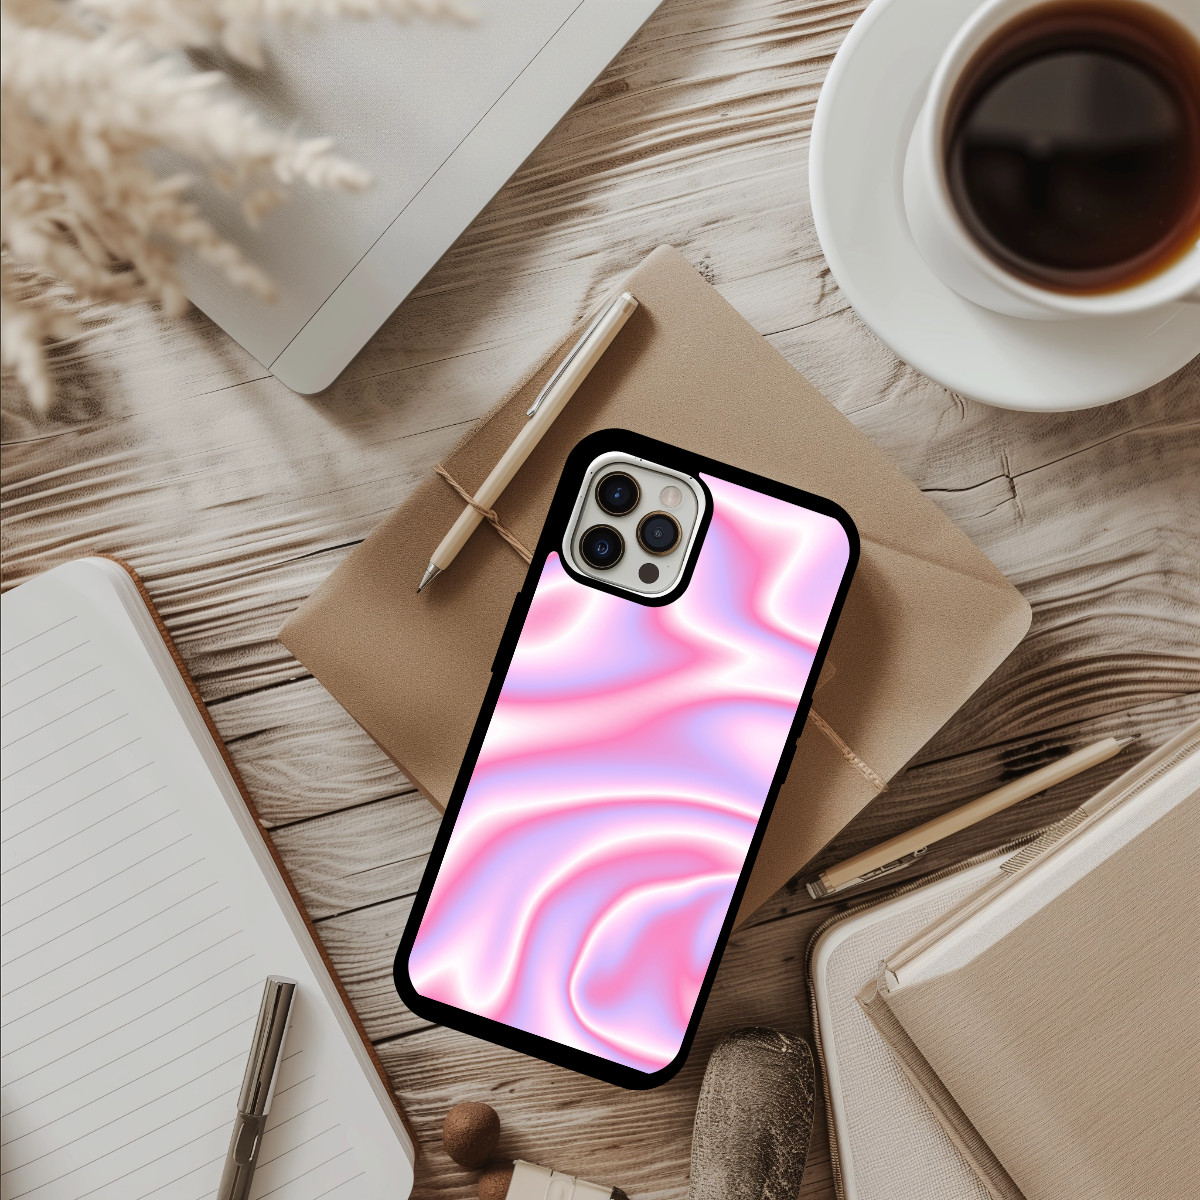 Personalized iPhone Case – pink phone case -swirly phone case – Holographic – cute phone case - pretty phone case - retro phone case - Y2K